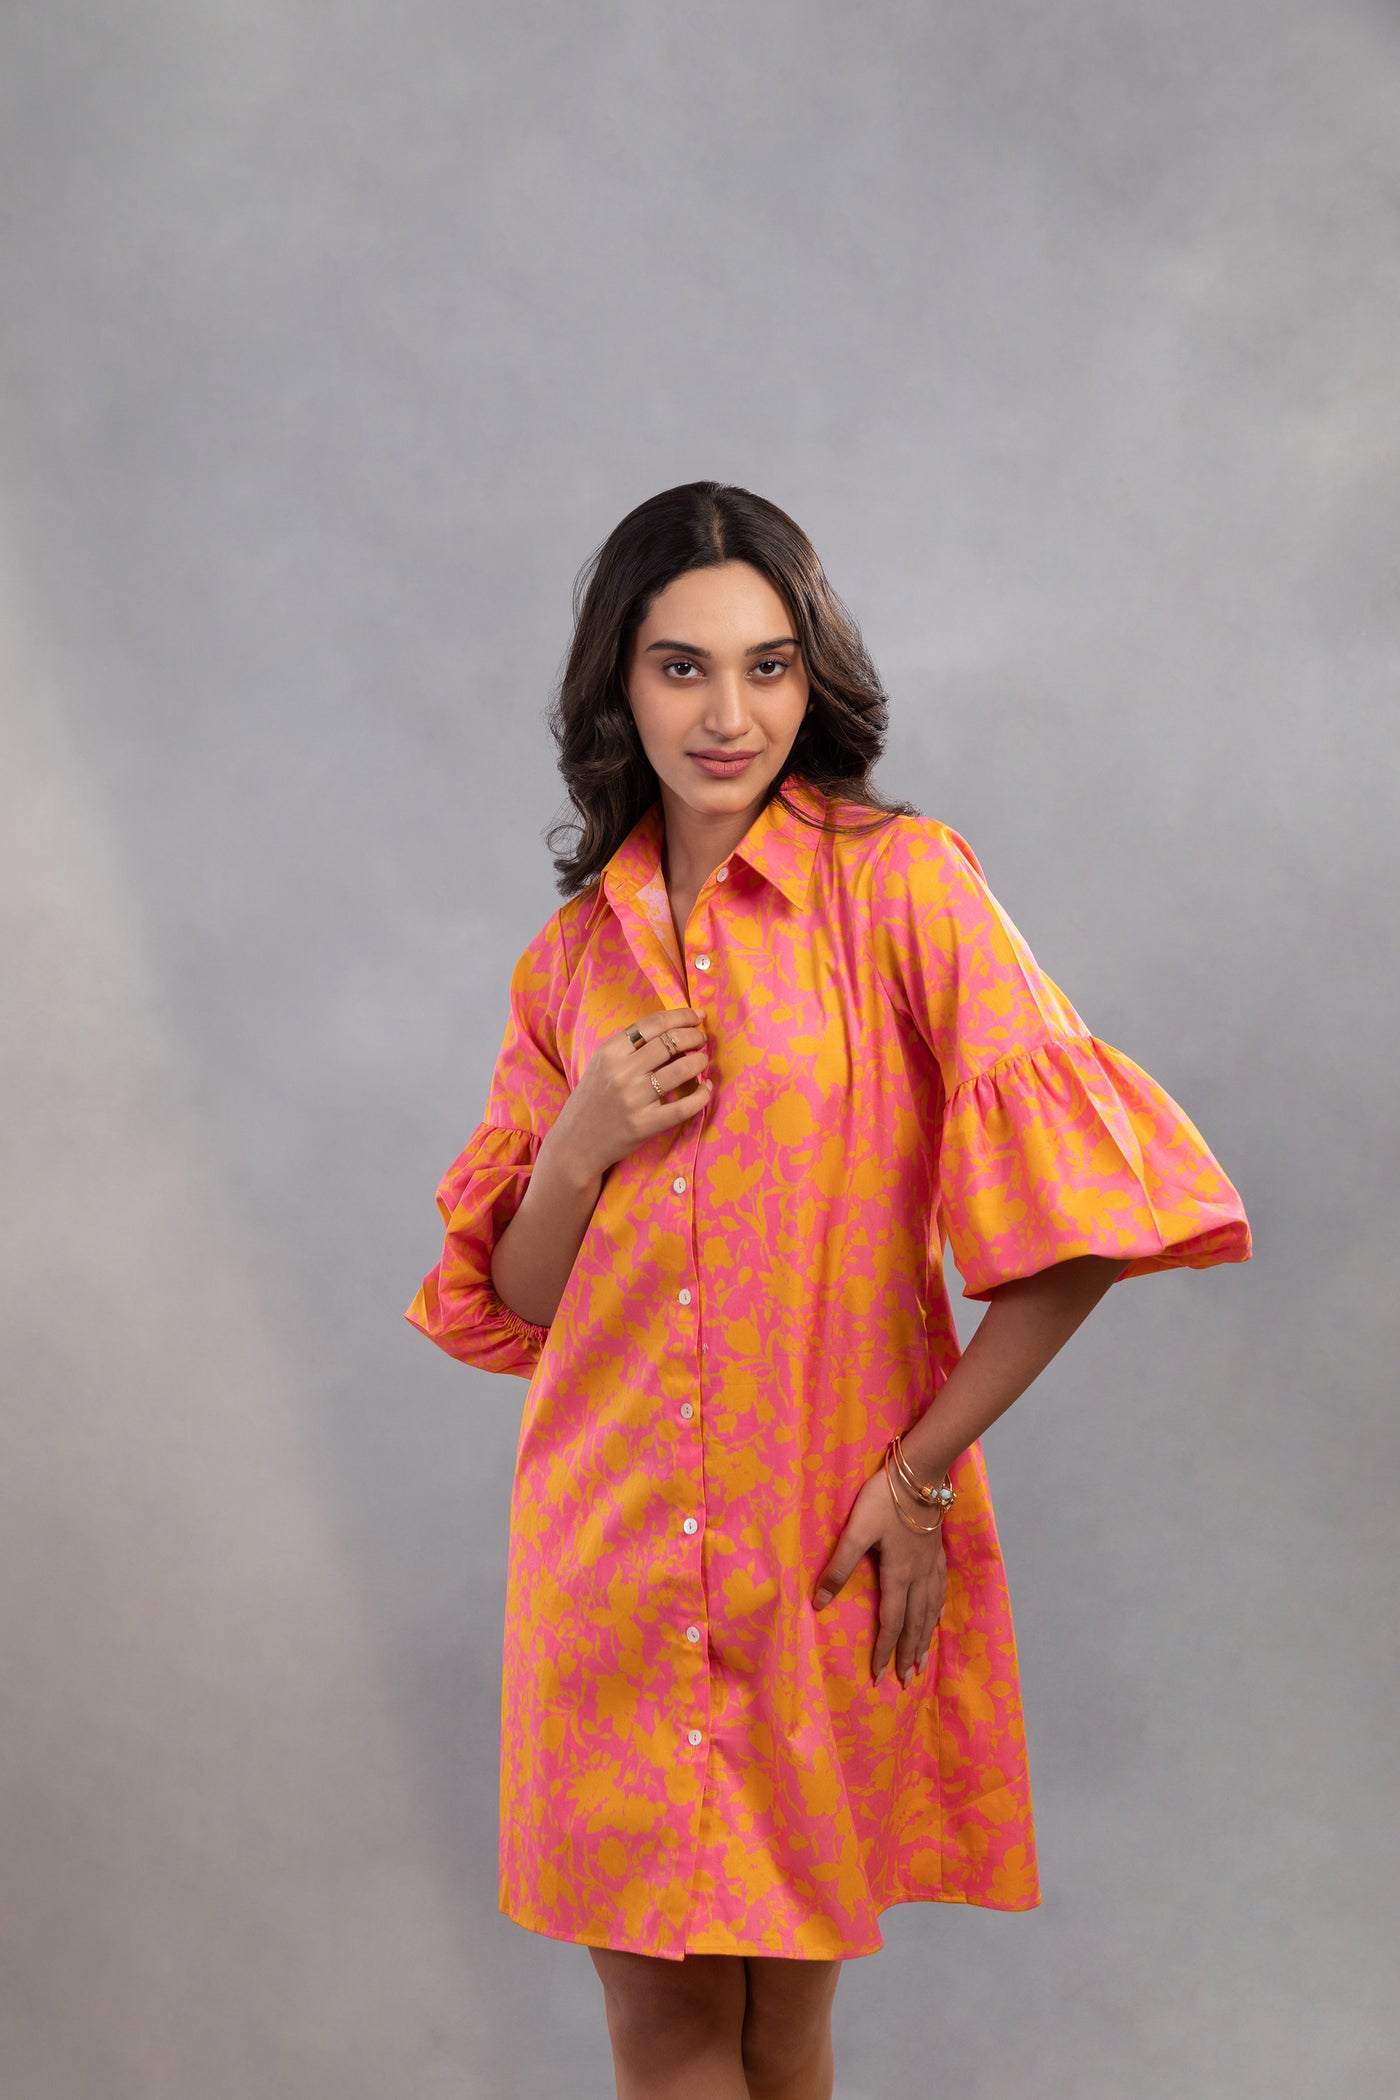 AIMEE - The Orange/Pink Color-pop Dress in Cotton with Ruffle Sleeves